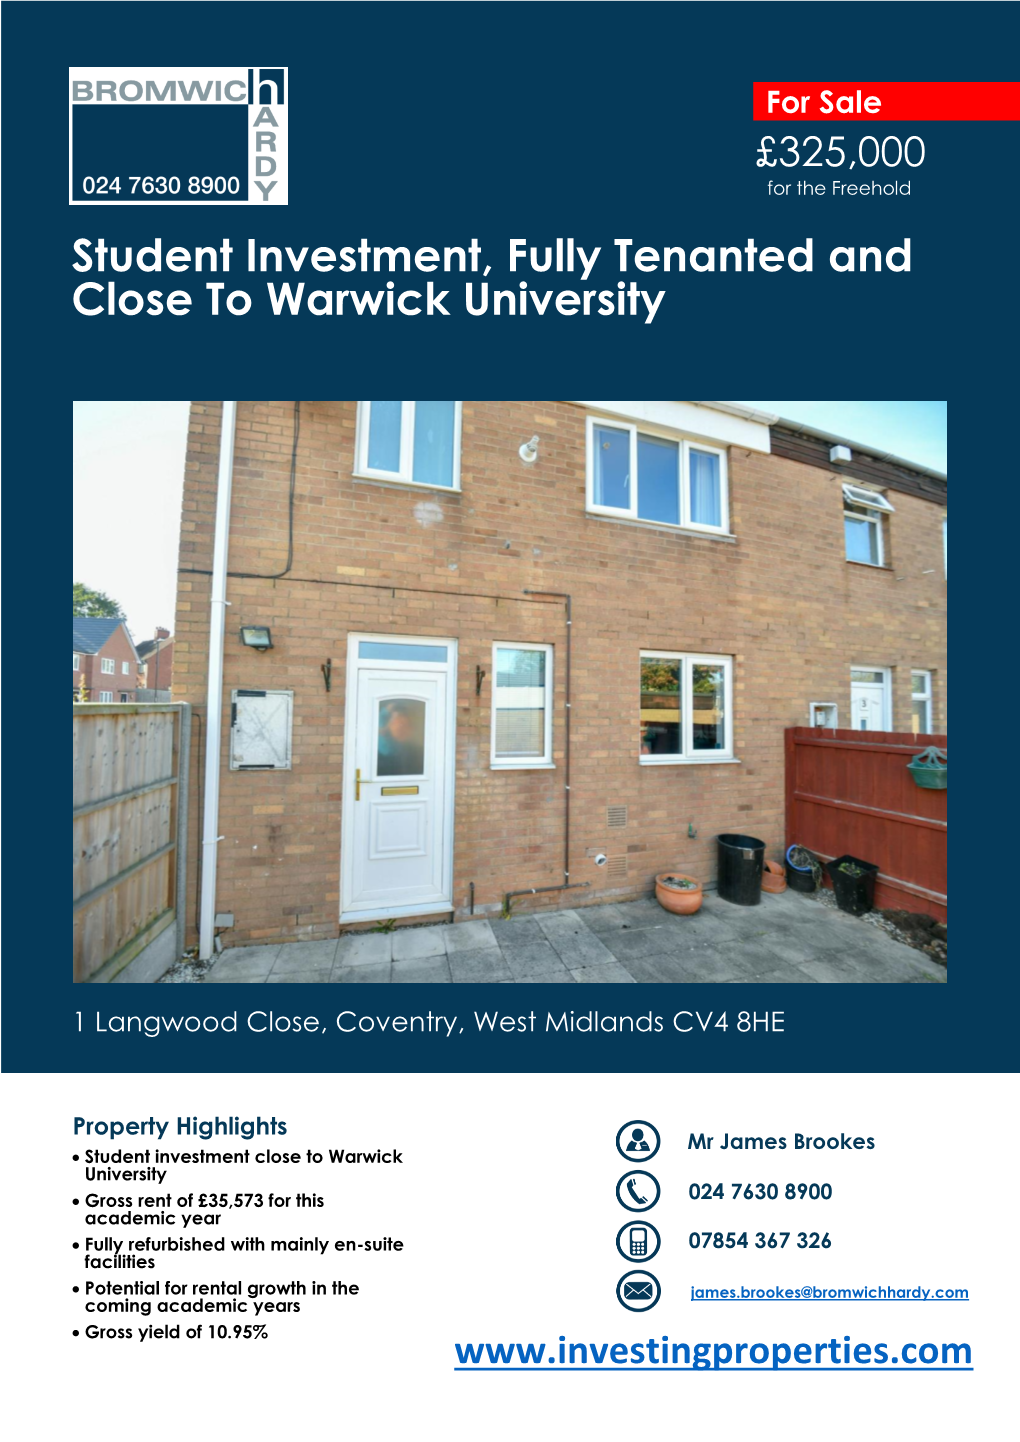 Student Investment, Fully Tenanted and Close to Warwick University